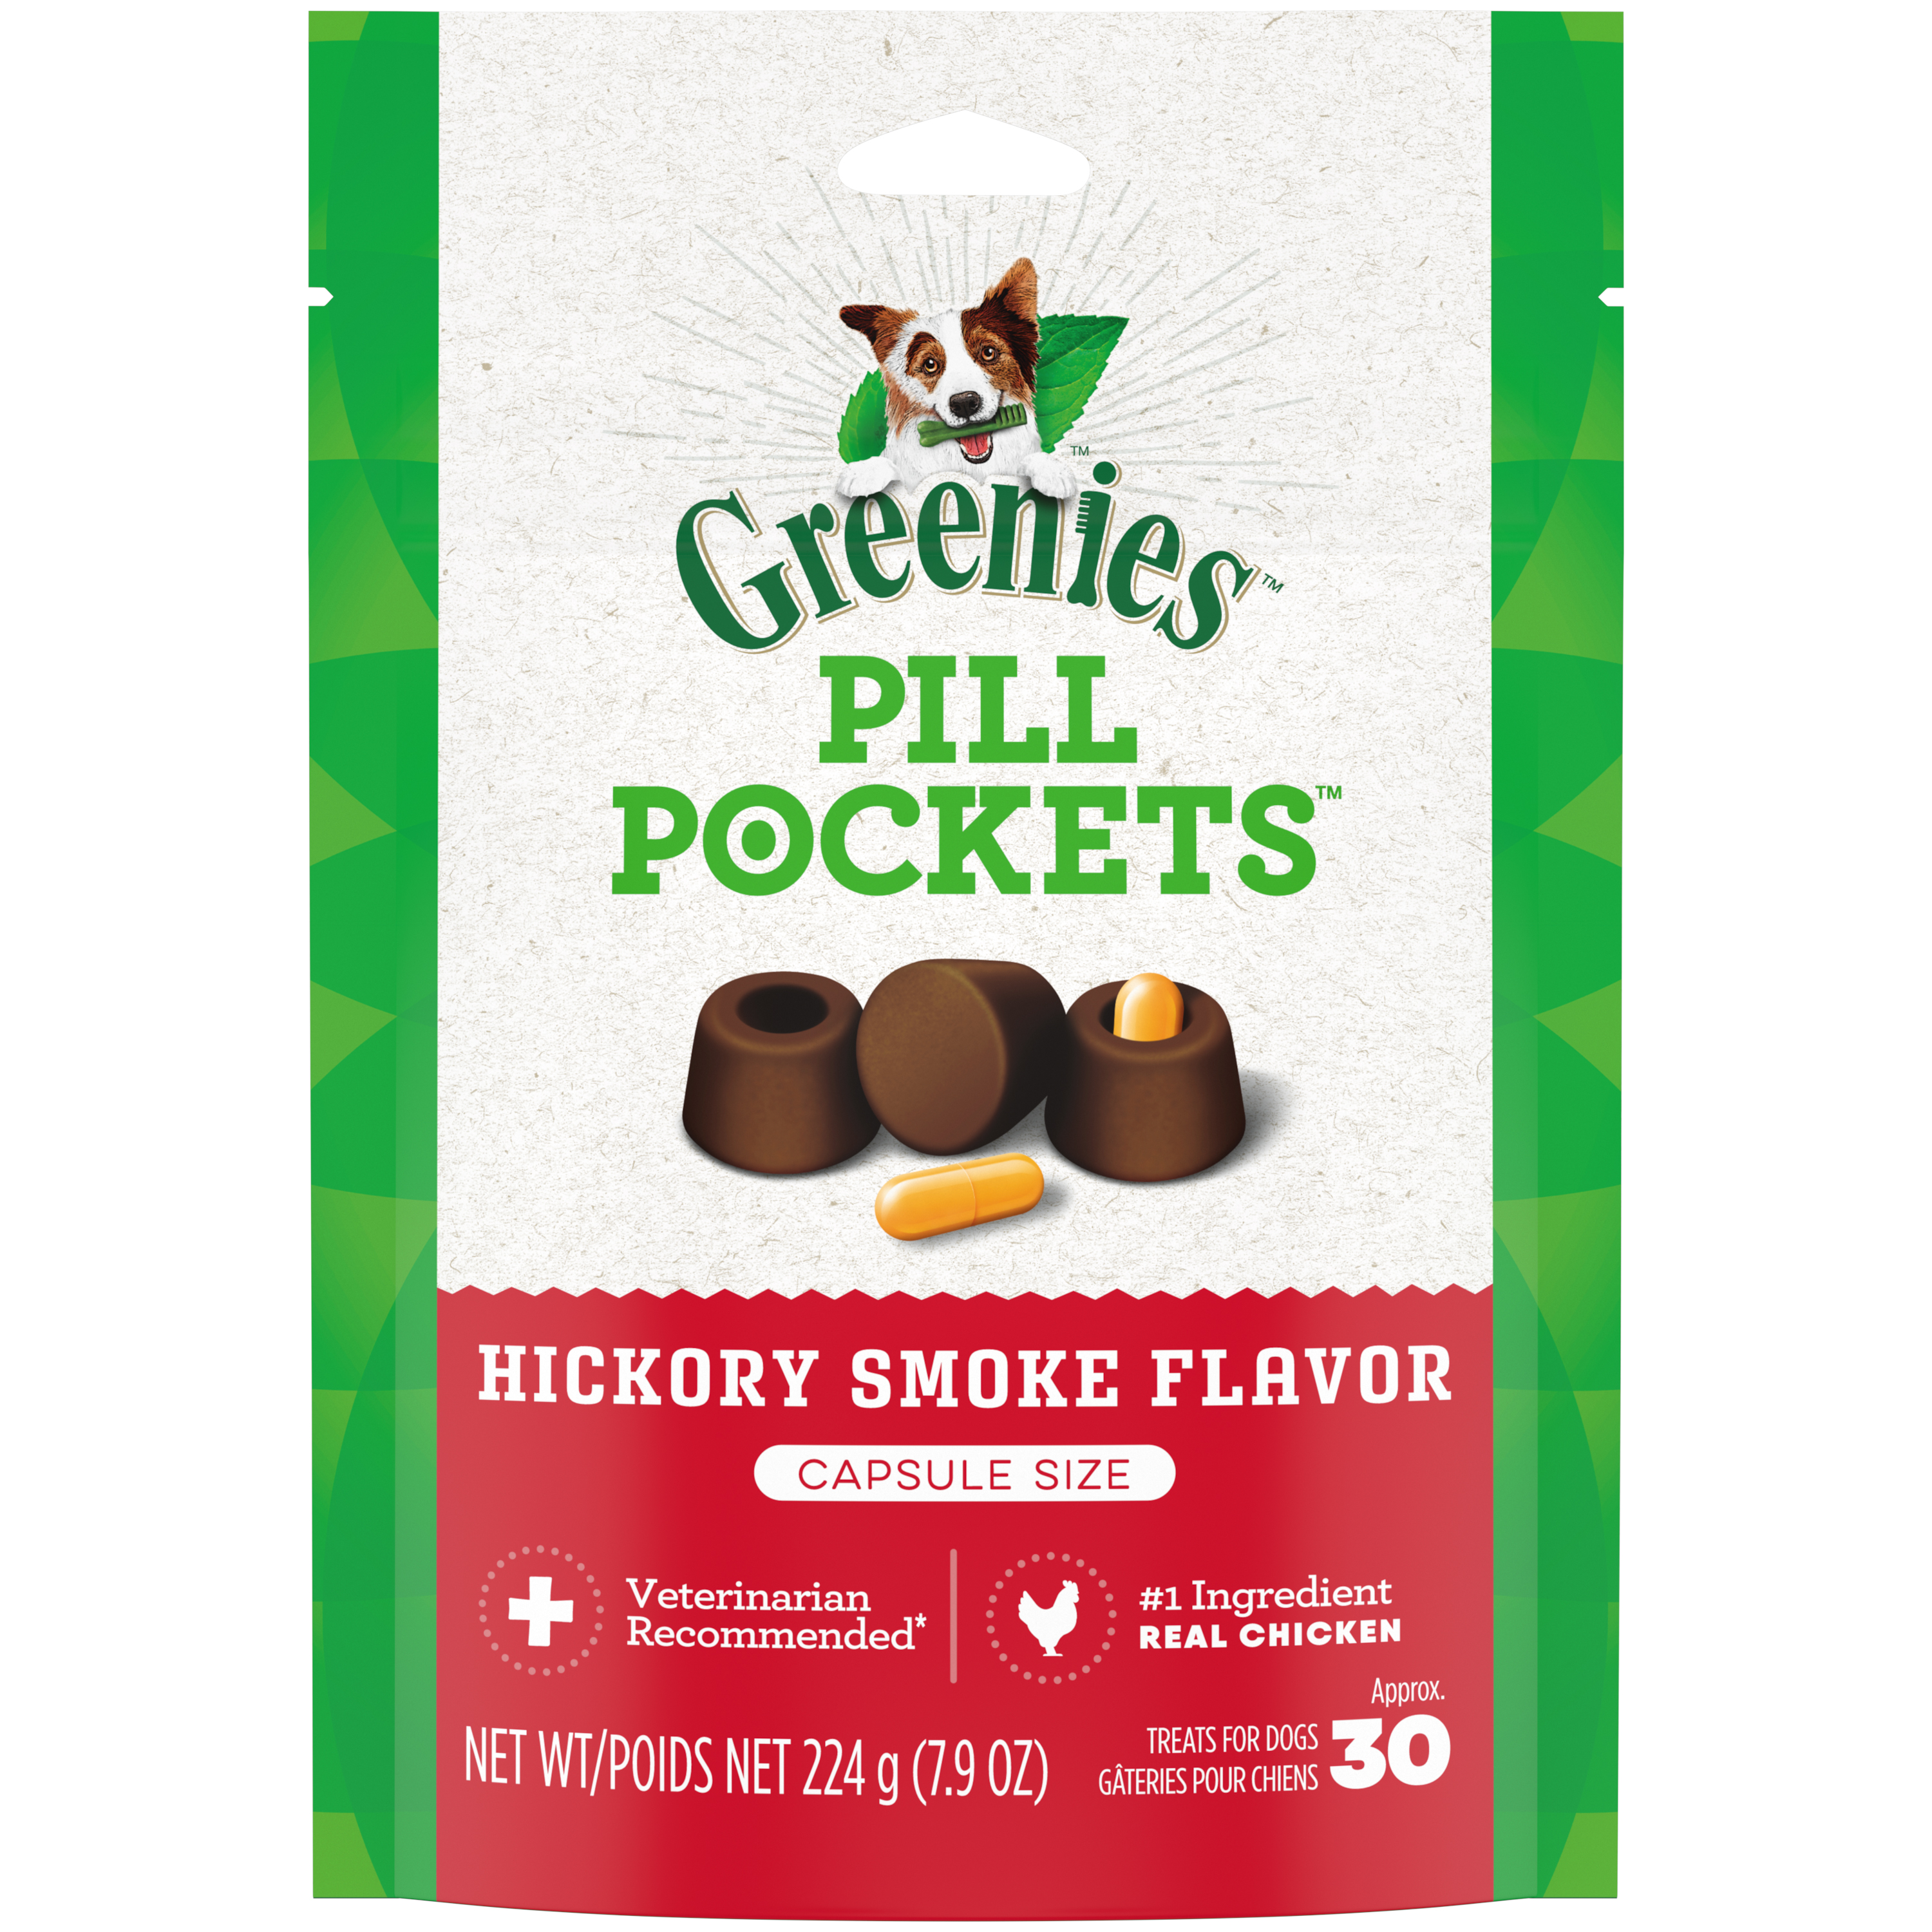 7.9 oz. Greenies Pill Pocket Hickory Capsule - Health/First Aid